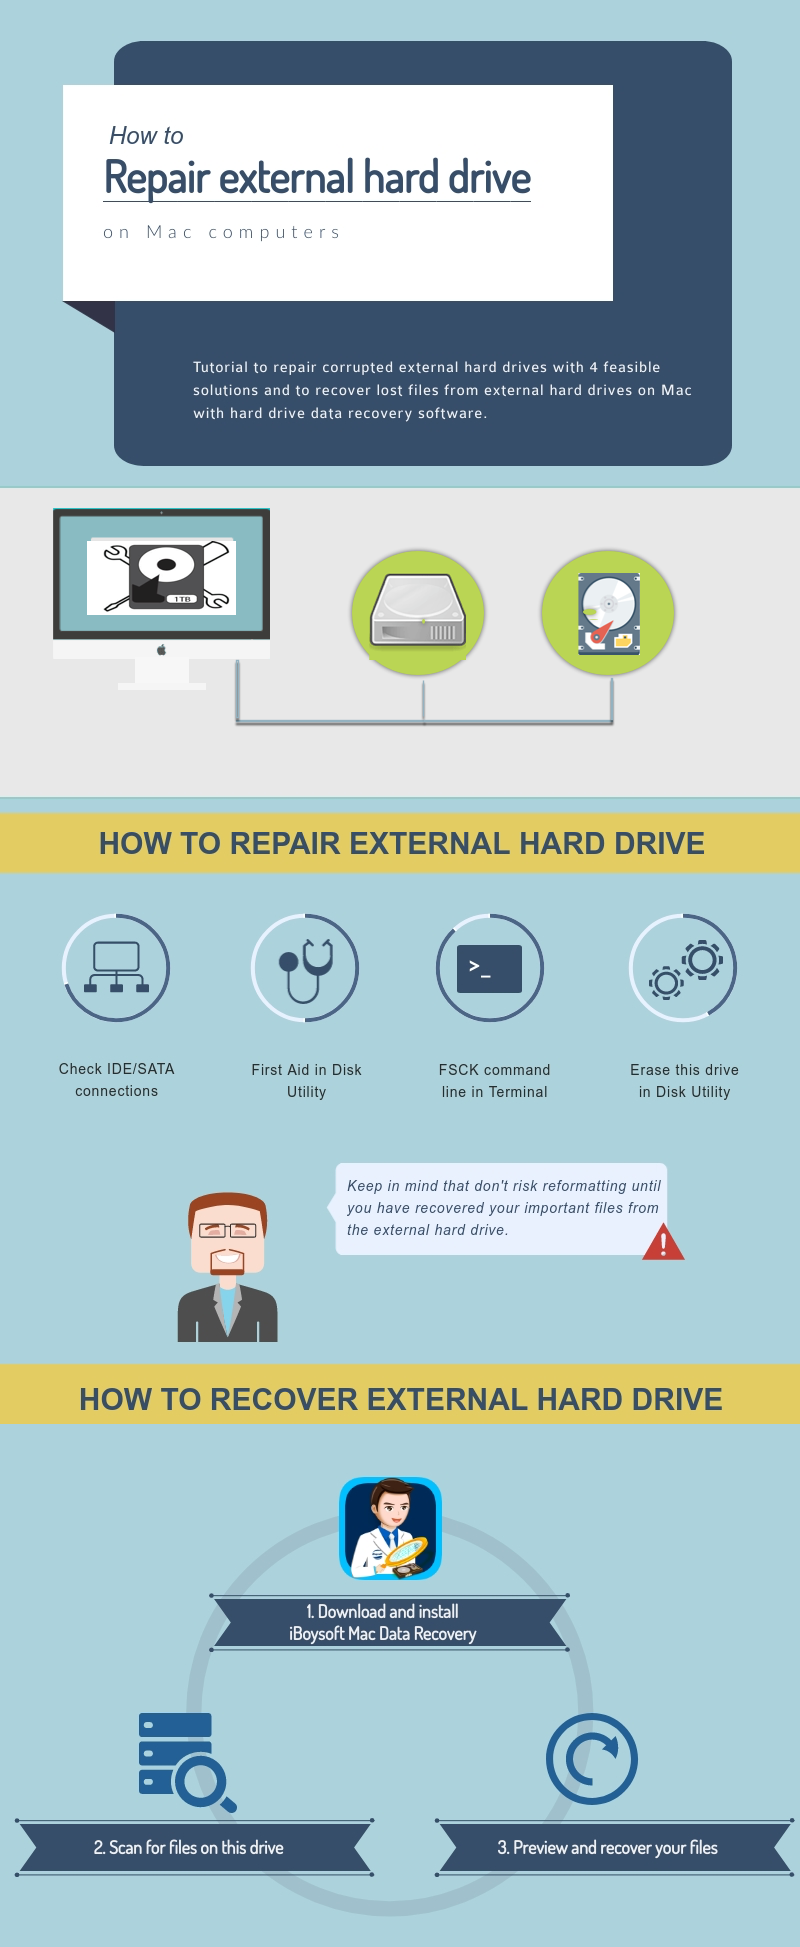 How To Repair External Hard Drive On Mac Without Losing Data